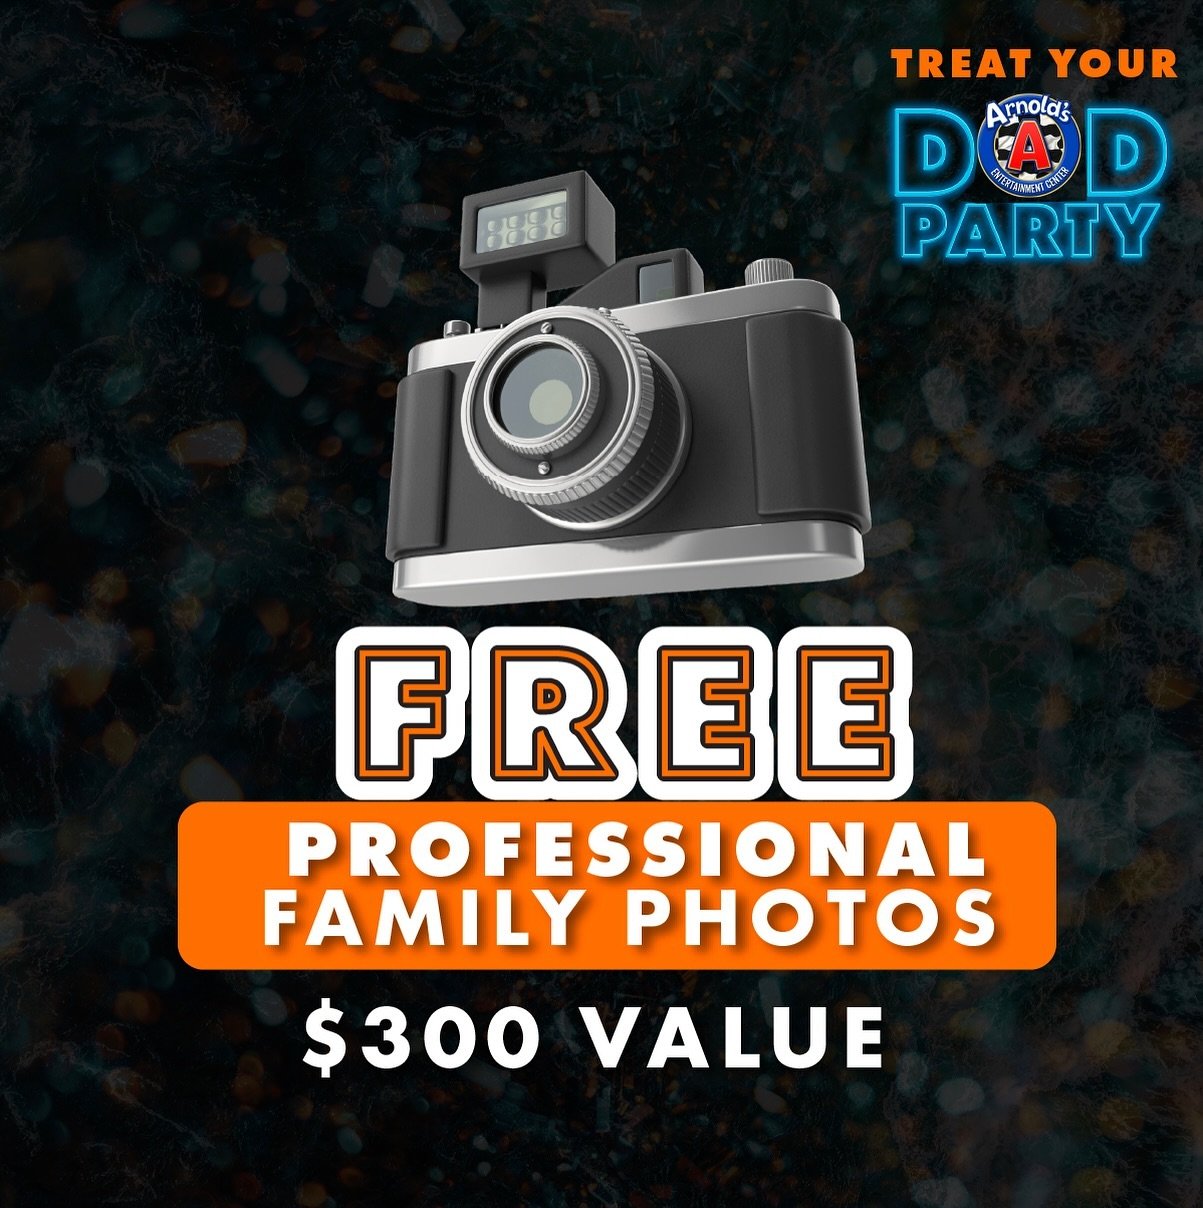 FREE Family Photos! Another great attraction at Arnold&rsquo;s &ldquo;Treat Your Dad&rdquo; Party this Father&rsquo;s Day! Go VIP at ArnoldsFFC.com

#fathersday #familyphotos #photos #free #photosesh